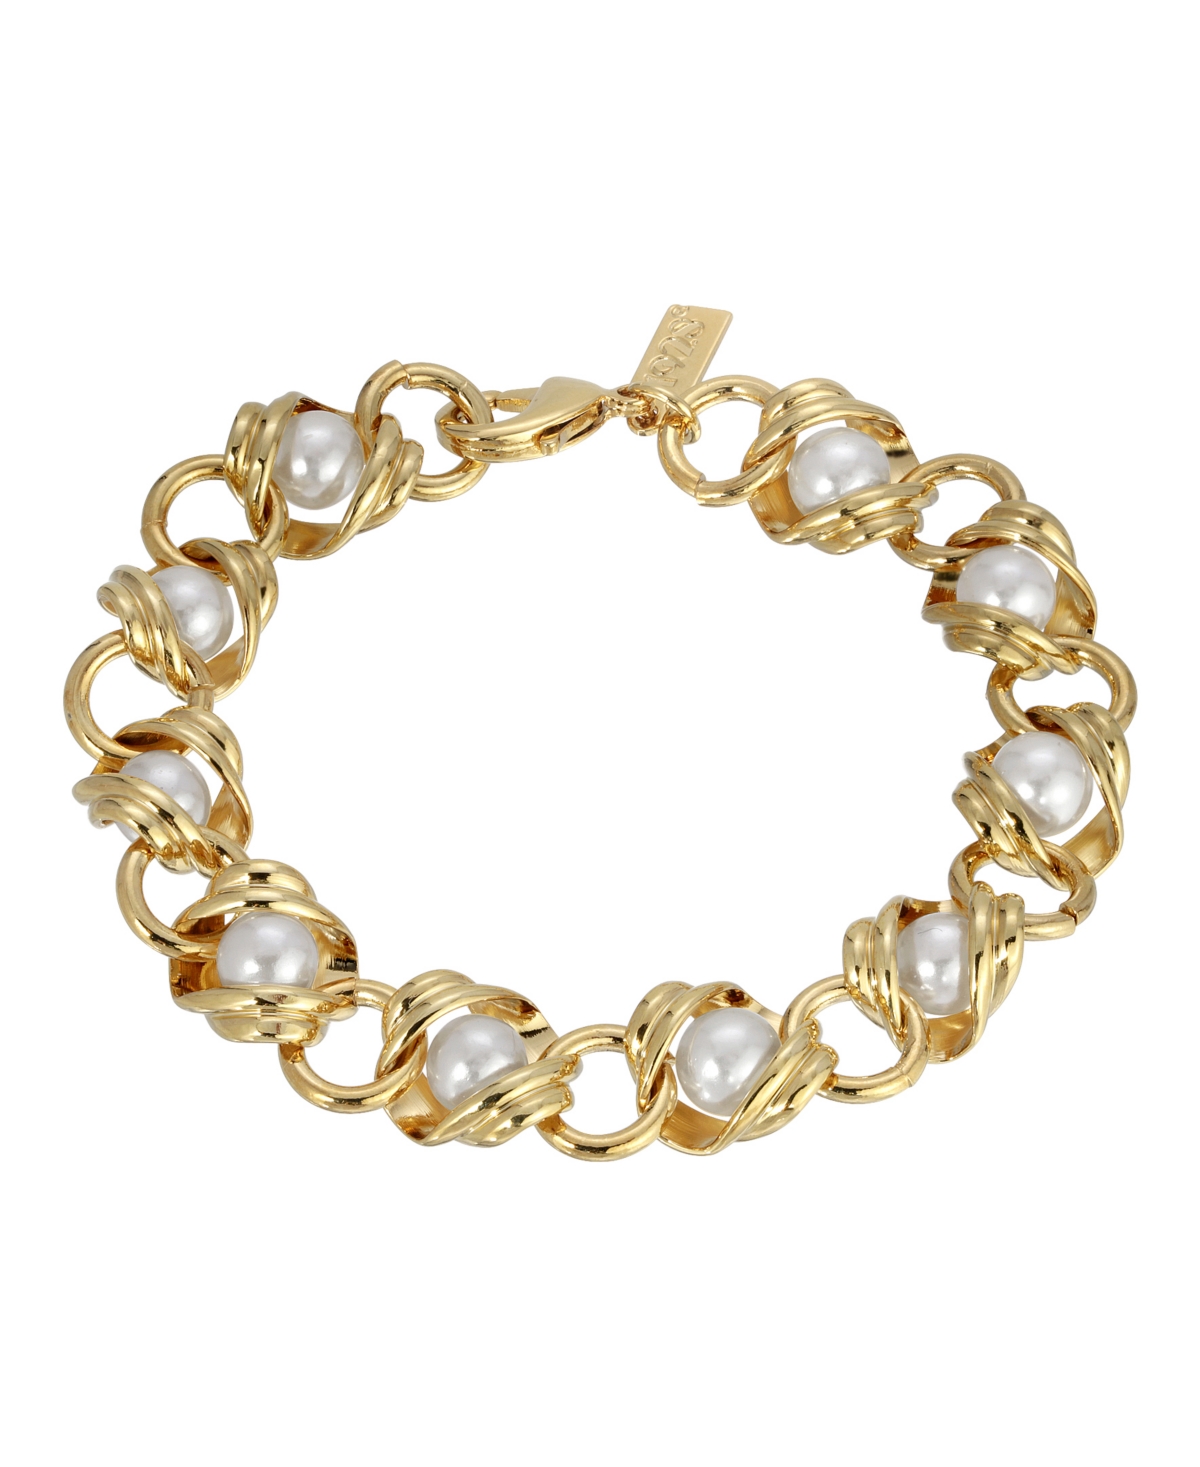 2028 Women's 14k Gold-tone Chain With Imitation Pearl Inset Link Bracelet In White